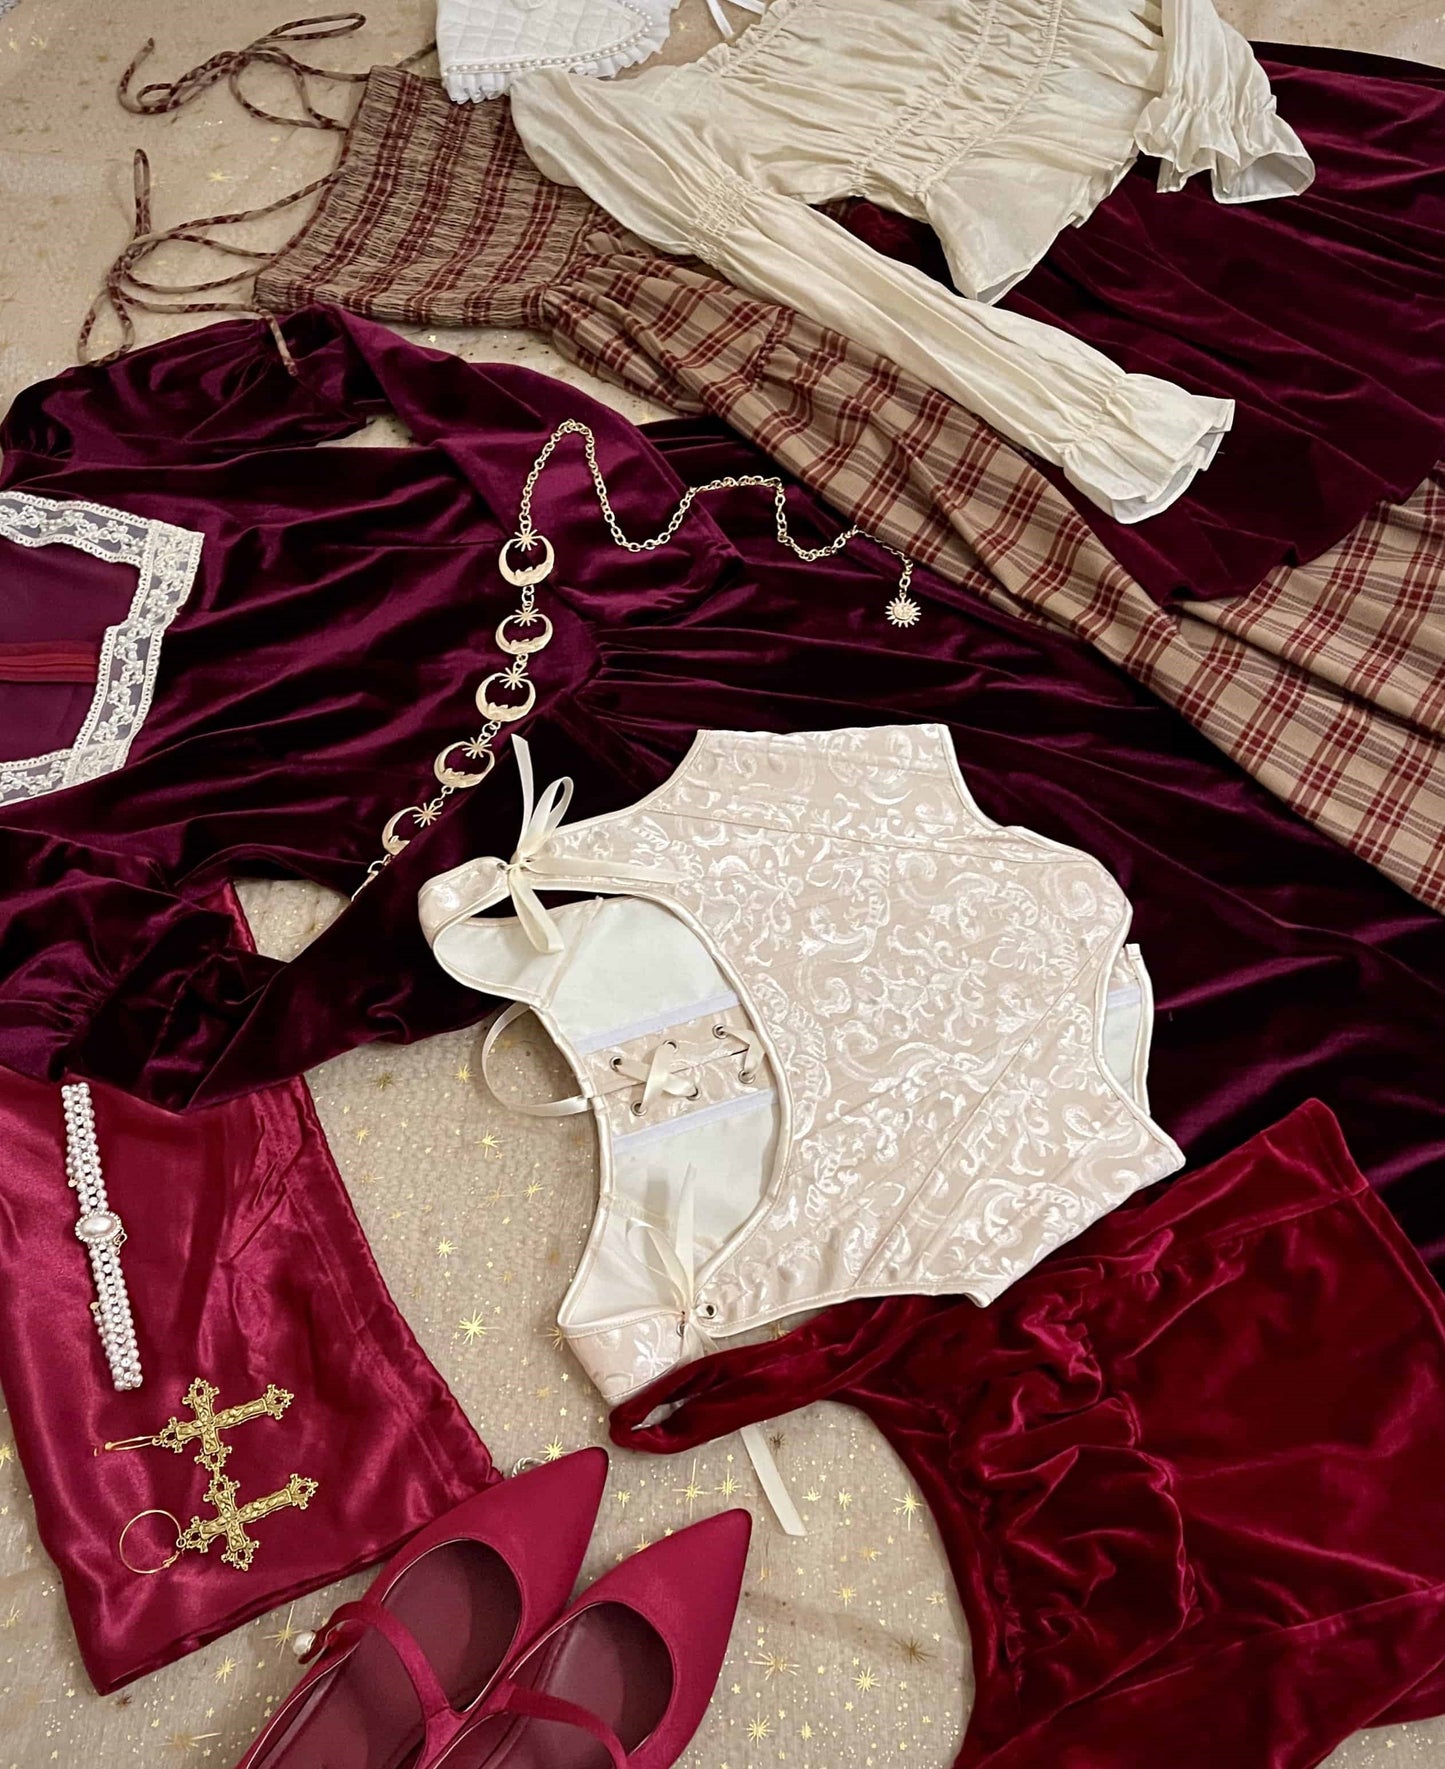 Details of a historical fashion clothing and accessories style bundle mystery bag, including medieval, renaissance, baroque, tudor, rococo, regency, Victorian, Edwardian and fantasy styles.